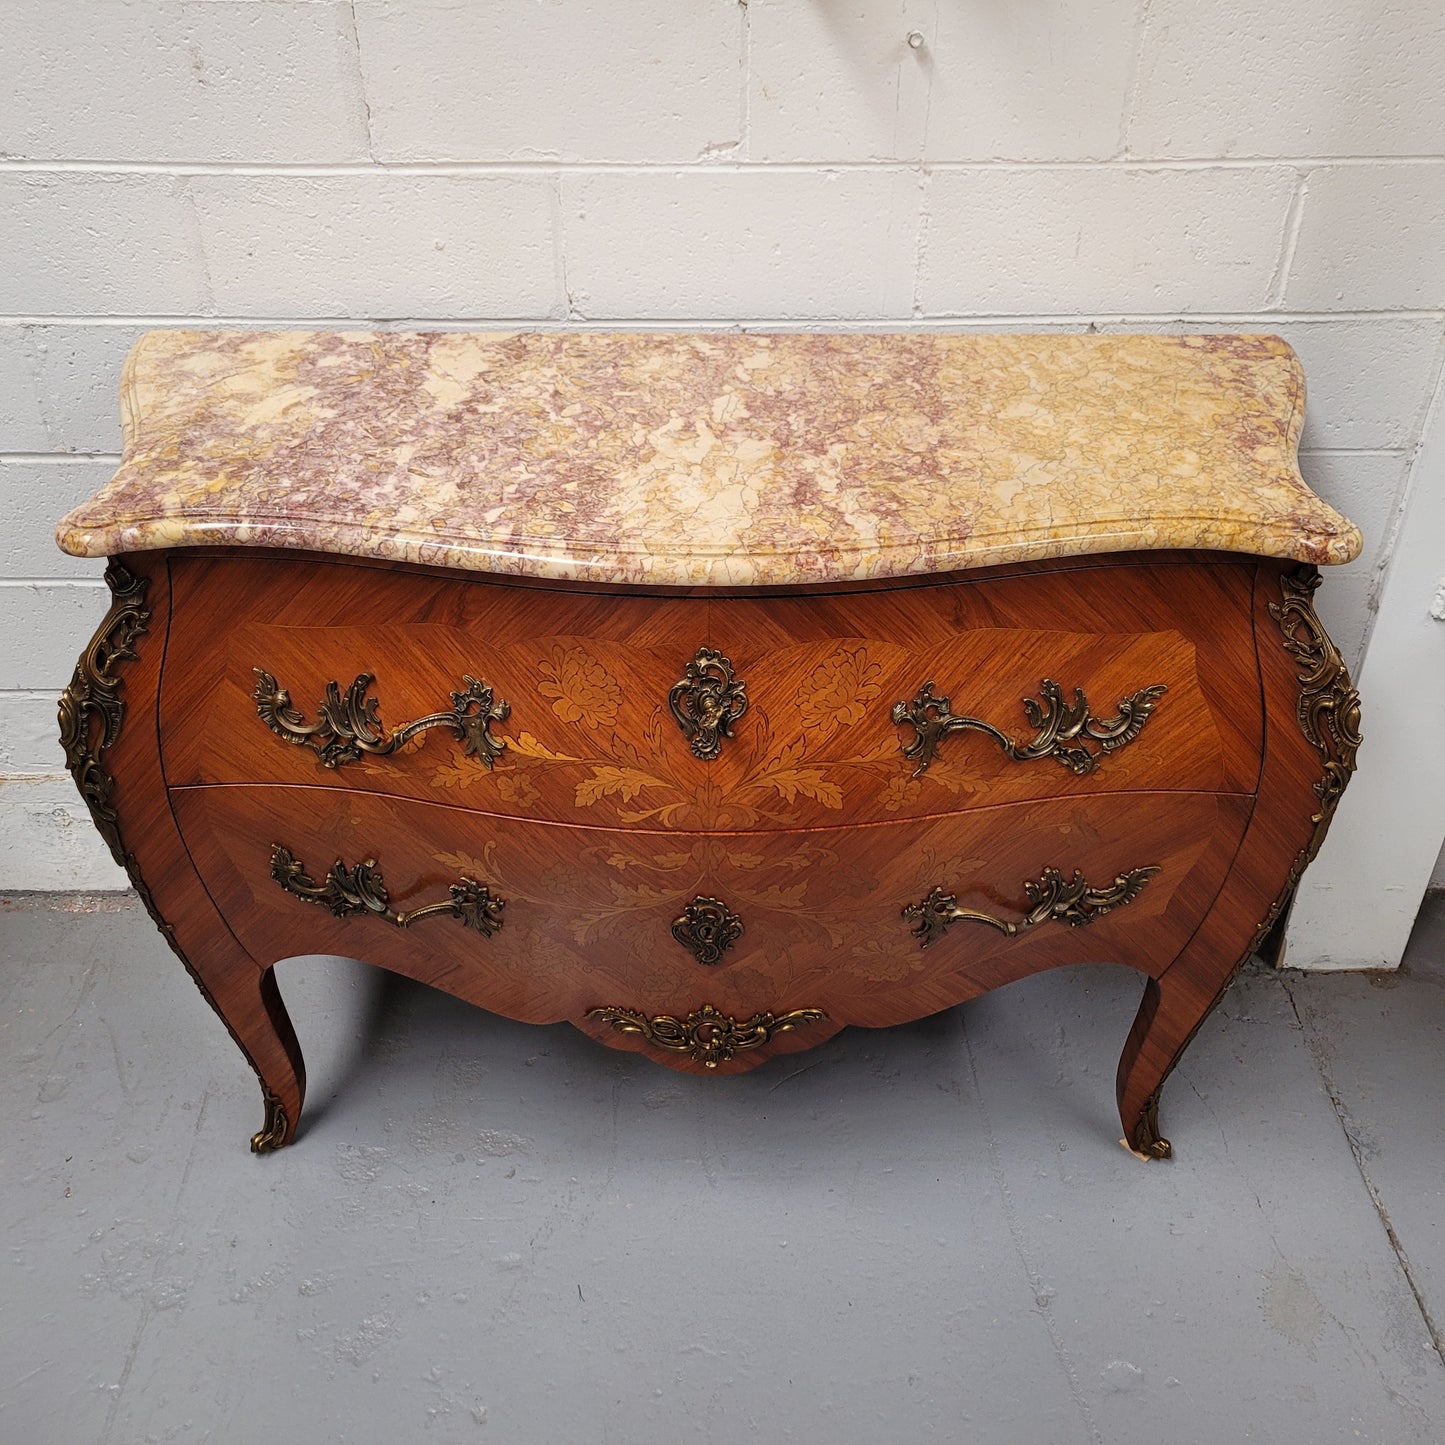 French Louis XV Style Marble Top Commode With Decorative Marquetry Inlay